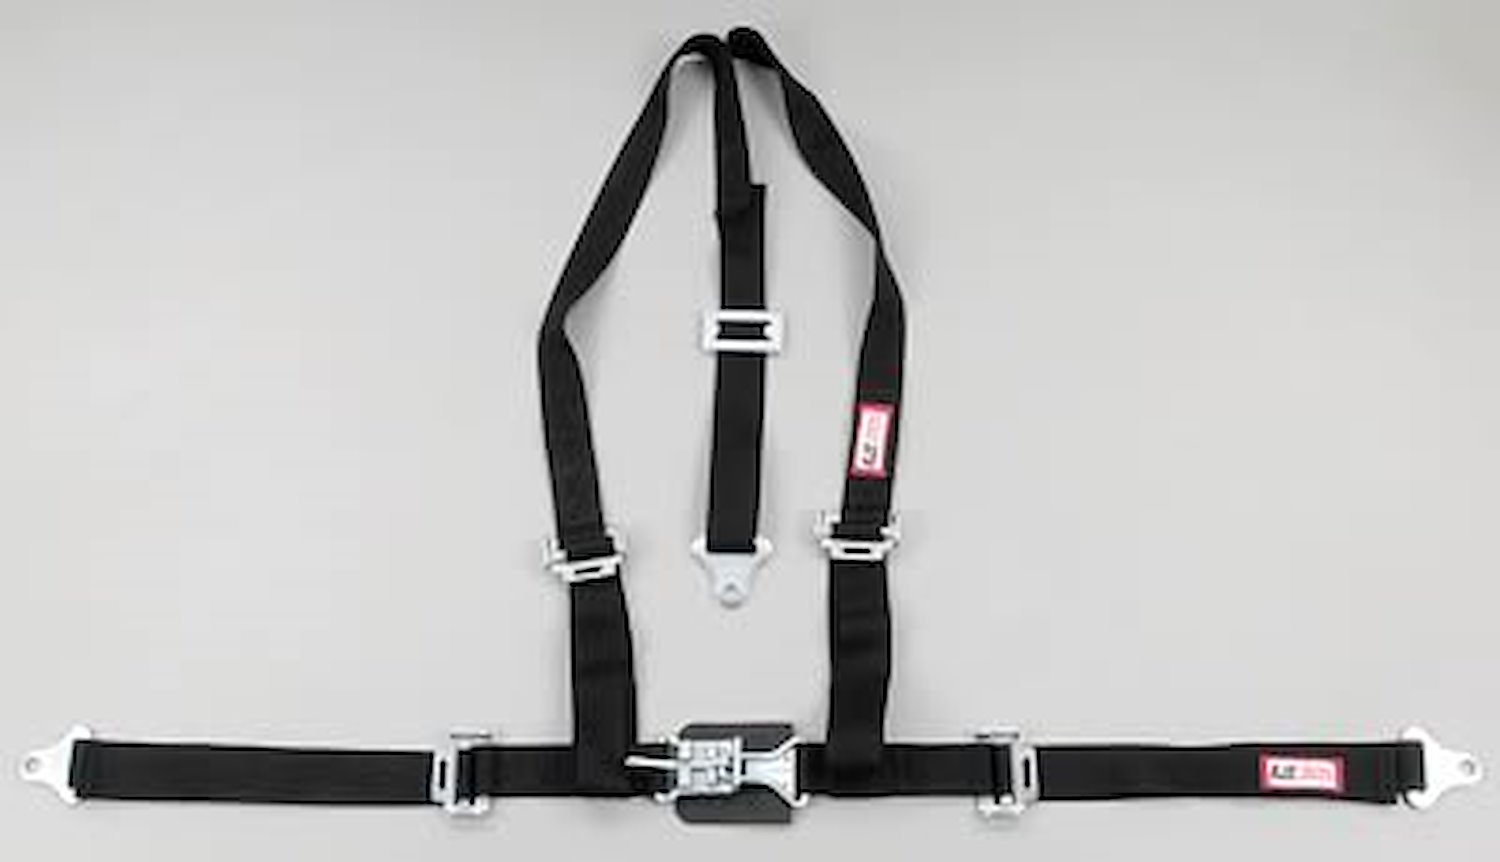 NON-SFI L&L HARNESS 3 PULL UP Lap Belt BOLT SEWN IN 2 S.H. Individual FLOOR Mount WRAP/BOLT RED